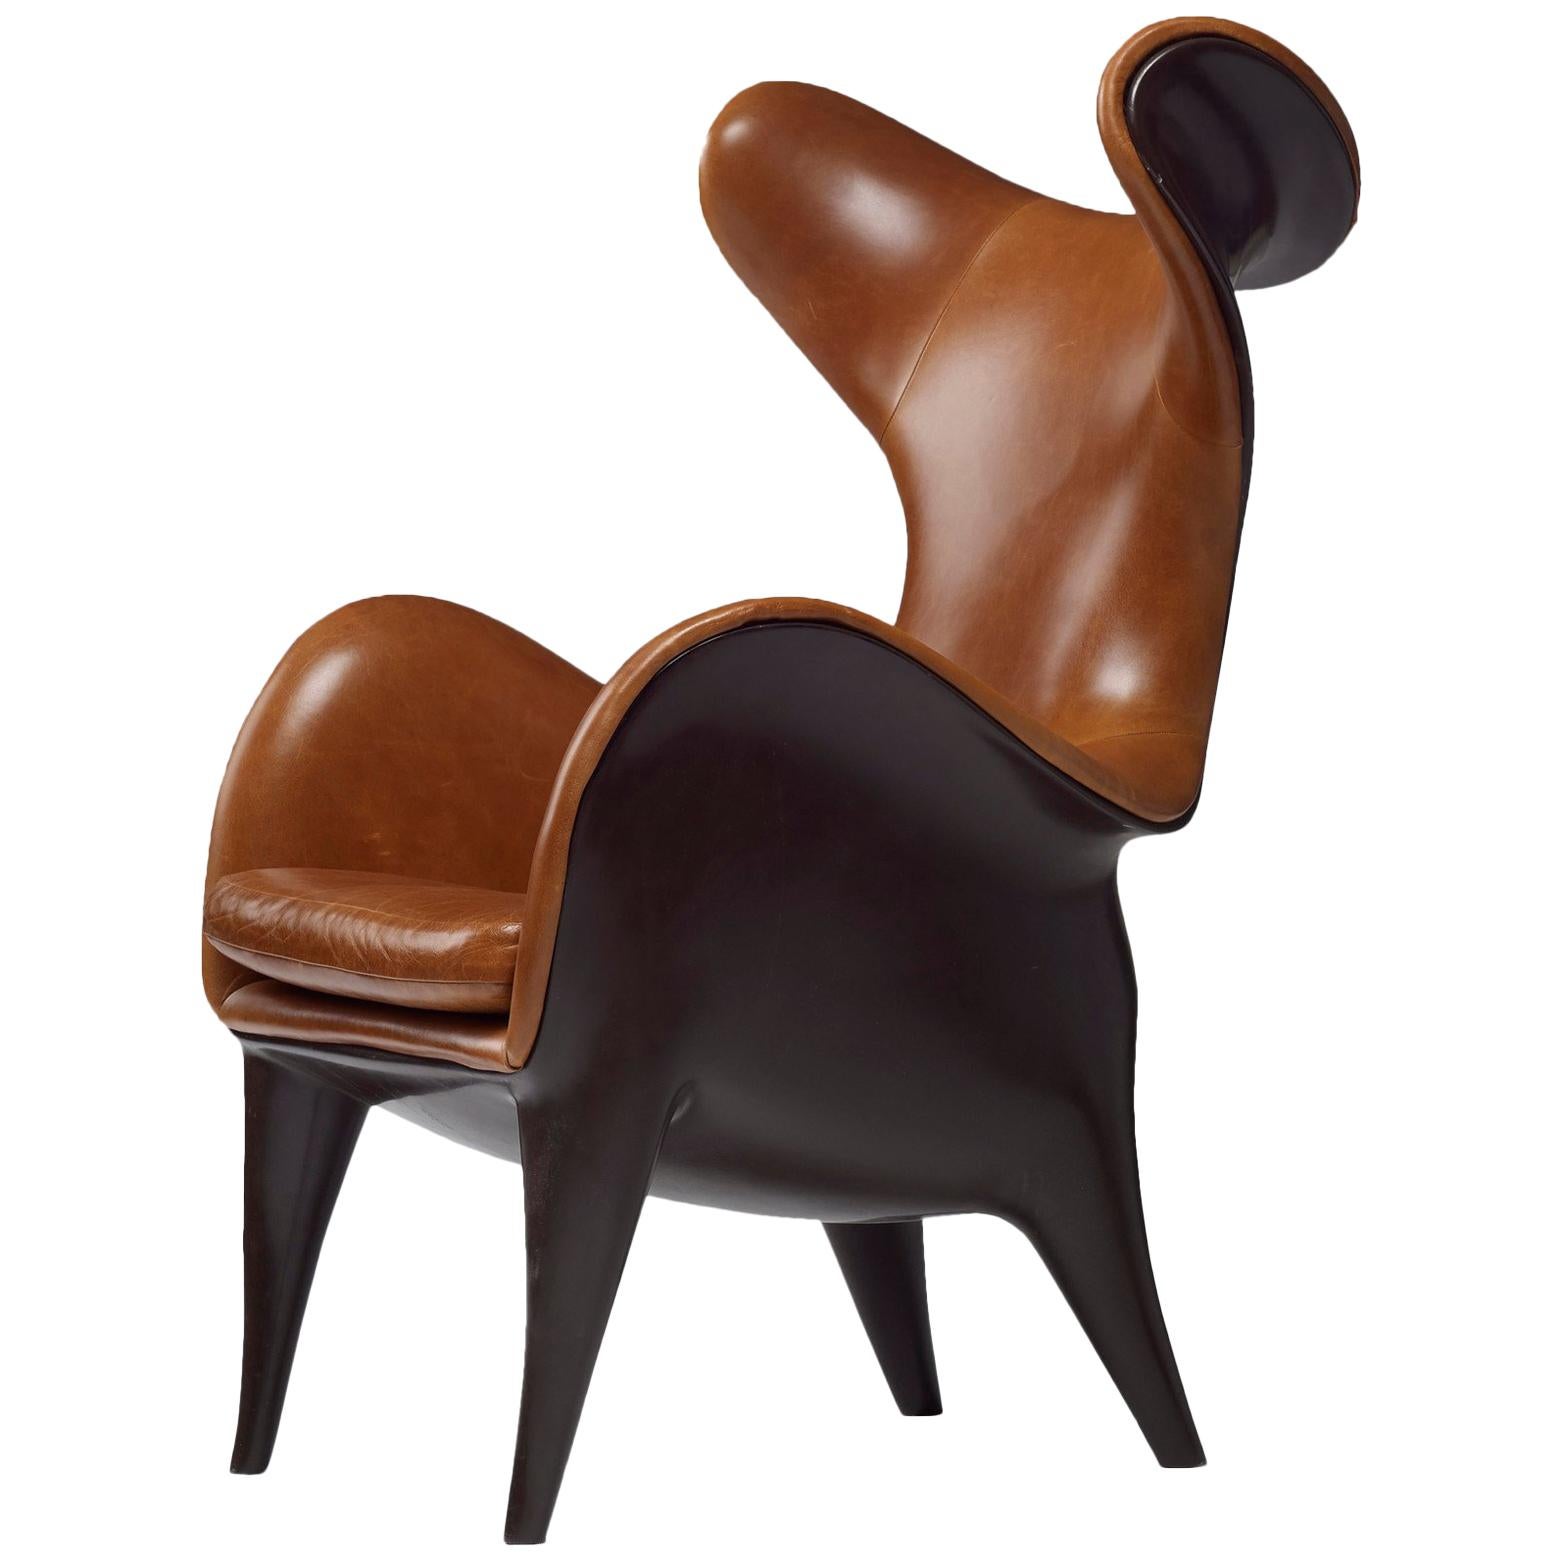 Frankie Wingback Chair/ Lounge Chair, Leather & Resin, Jordan Mozer, USA, 2018 For Sale 3